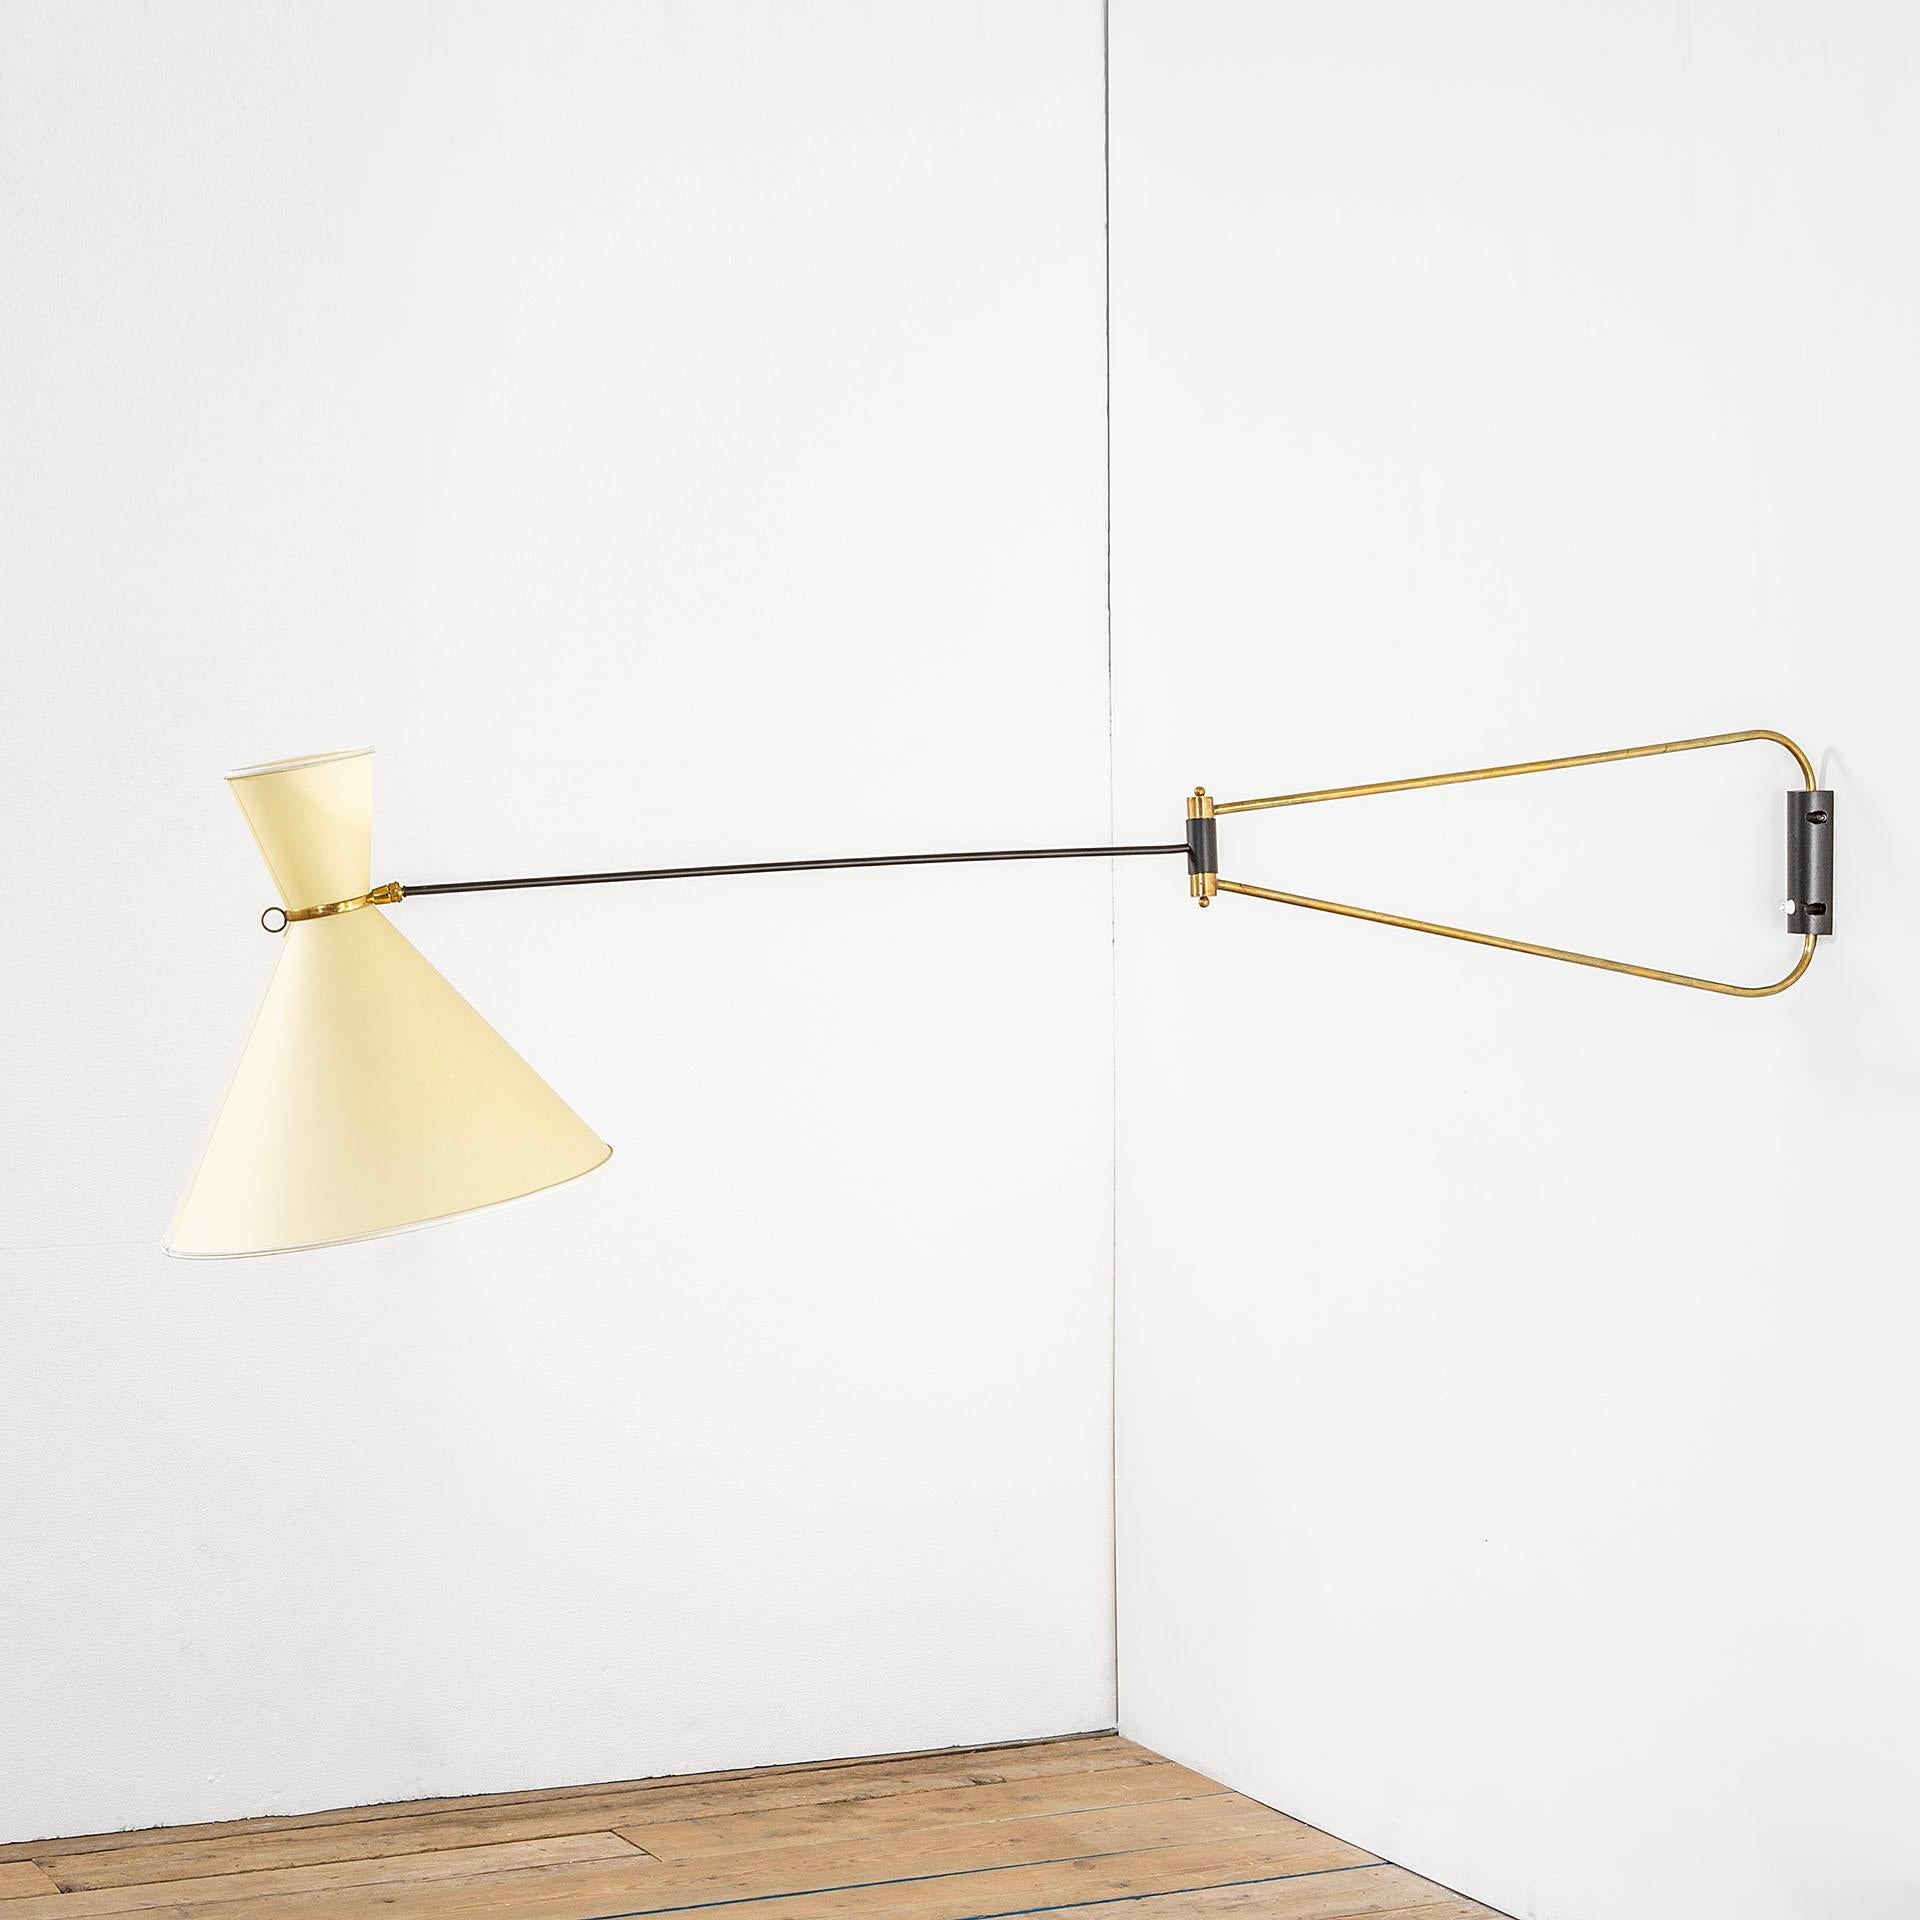 Born in 1921 and trained as a bronze turner at the École Boulle School of Applied Arts, Robert Mathieu created some of the most exceptional lighting of his generation.
Robert Mathieu, thanks to his double pendulum systems and his infinite creativity